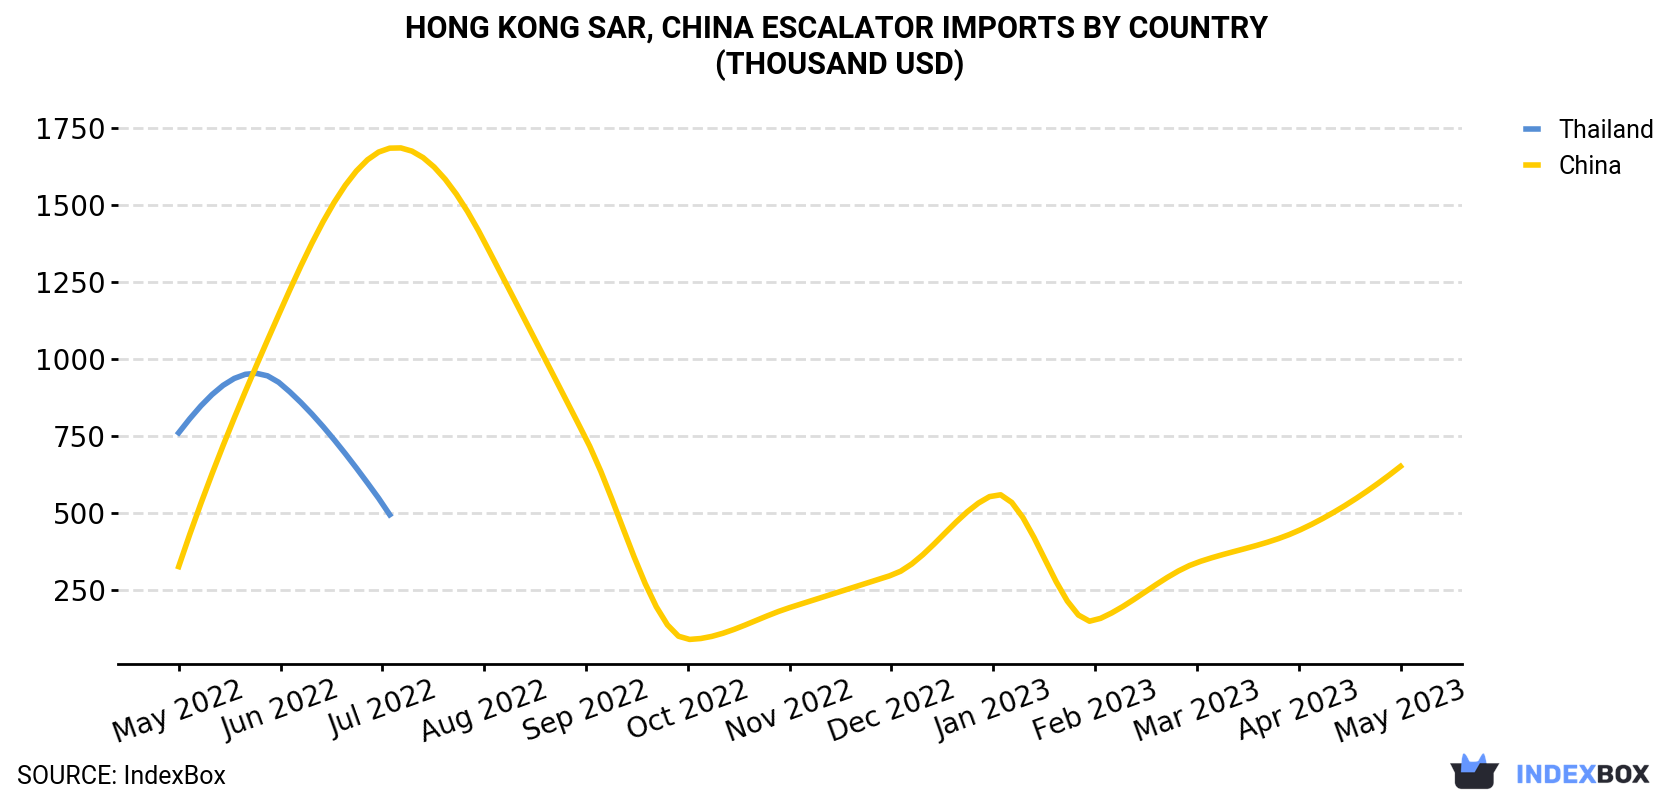 Hong Kong Escalator Imports By Country (Thousand USD)